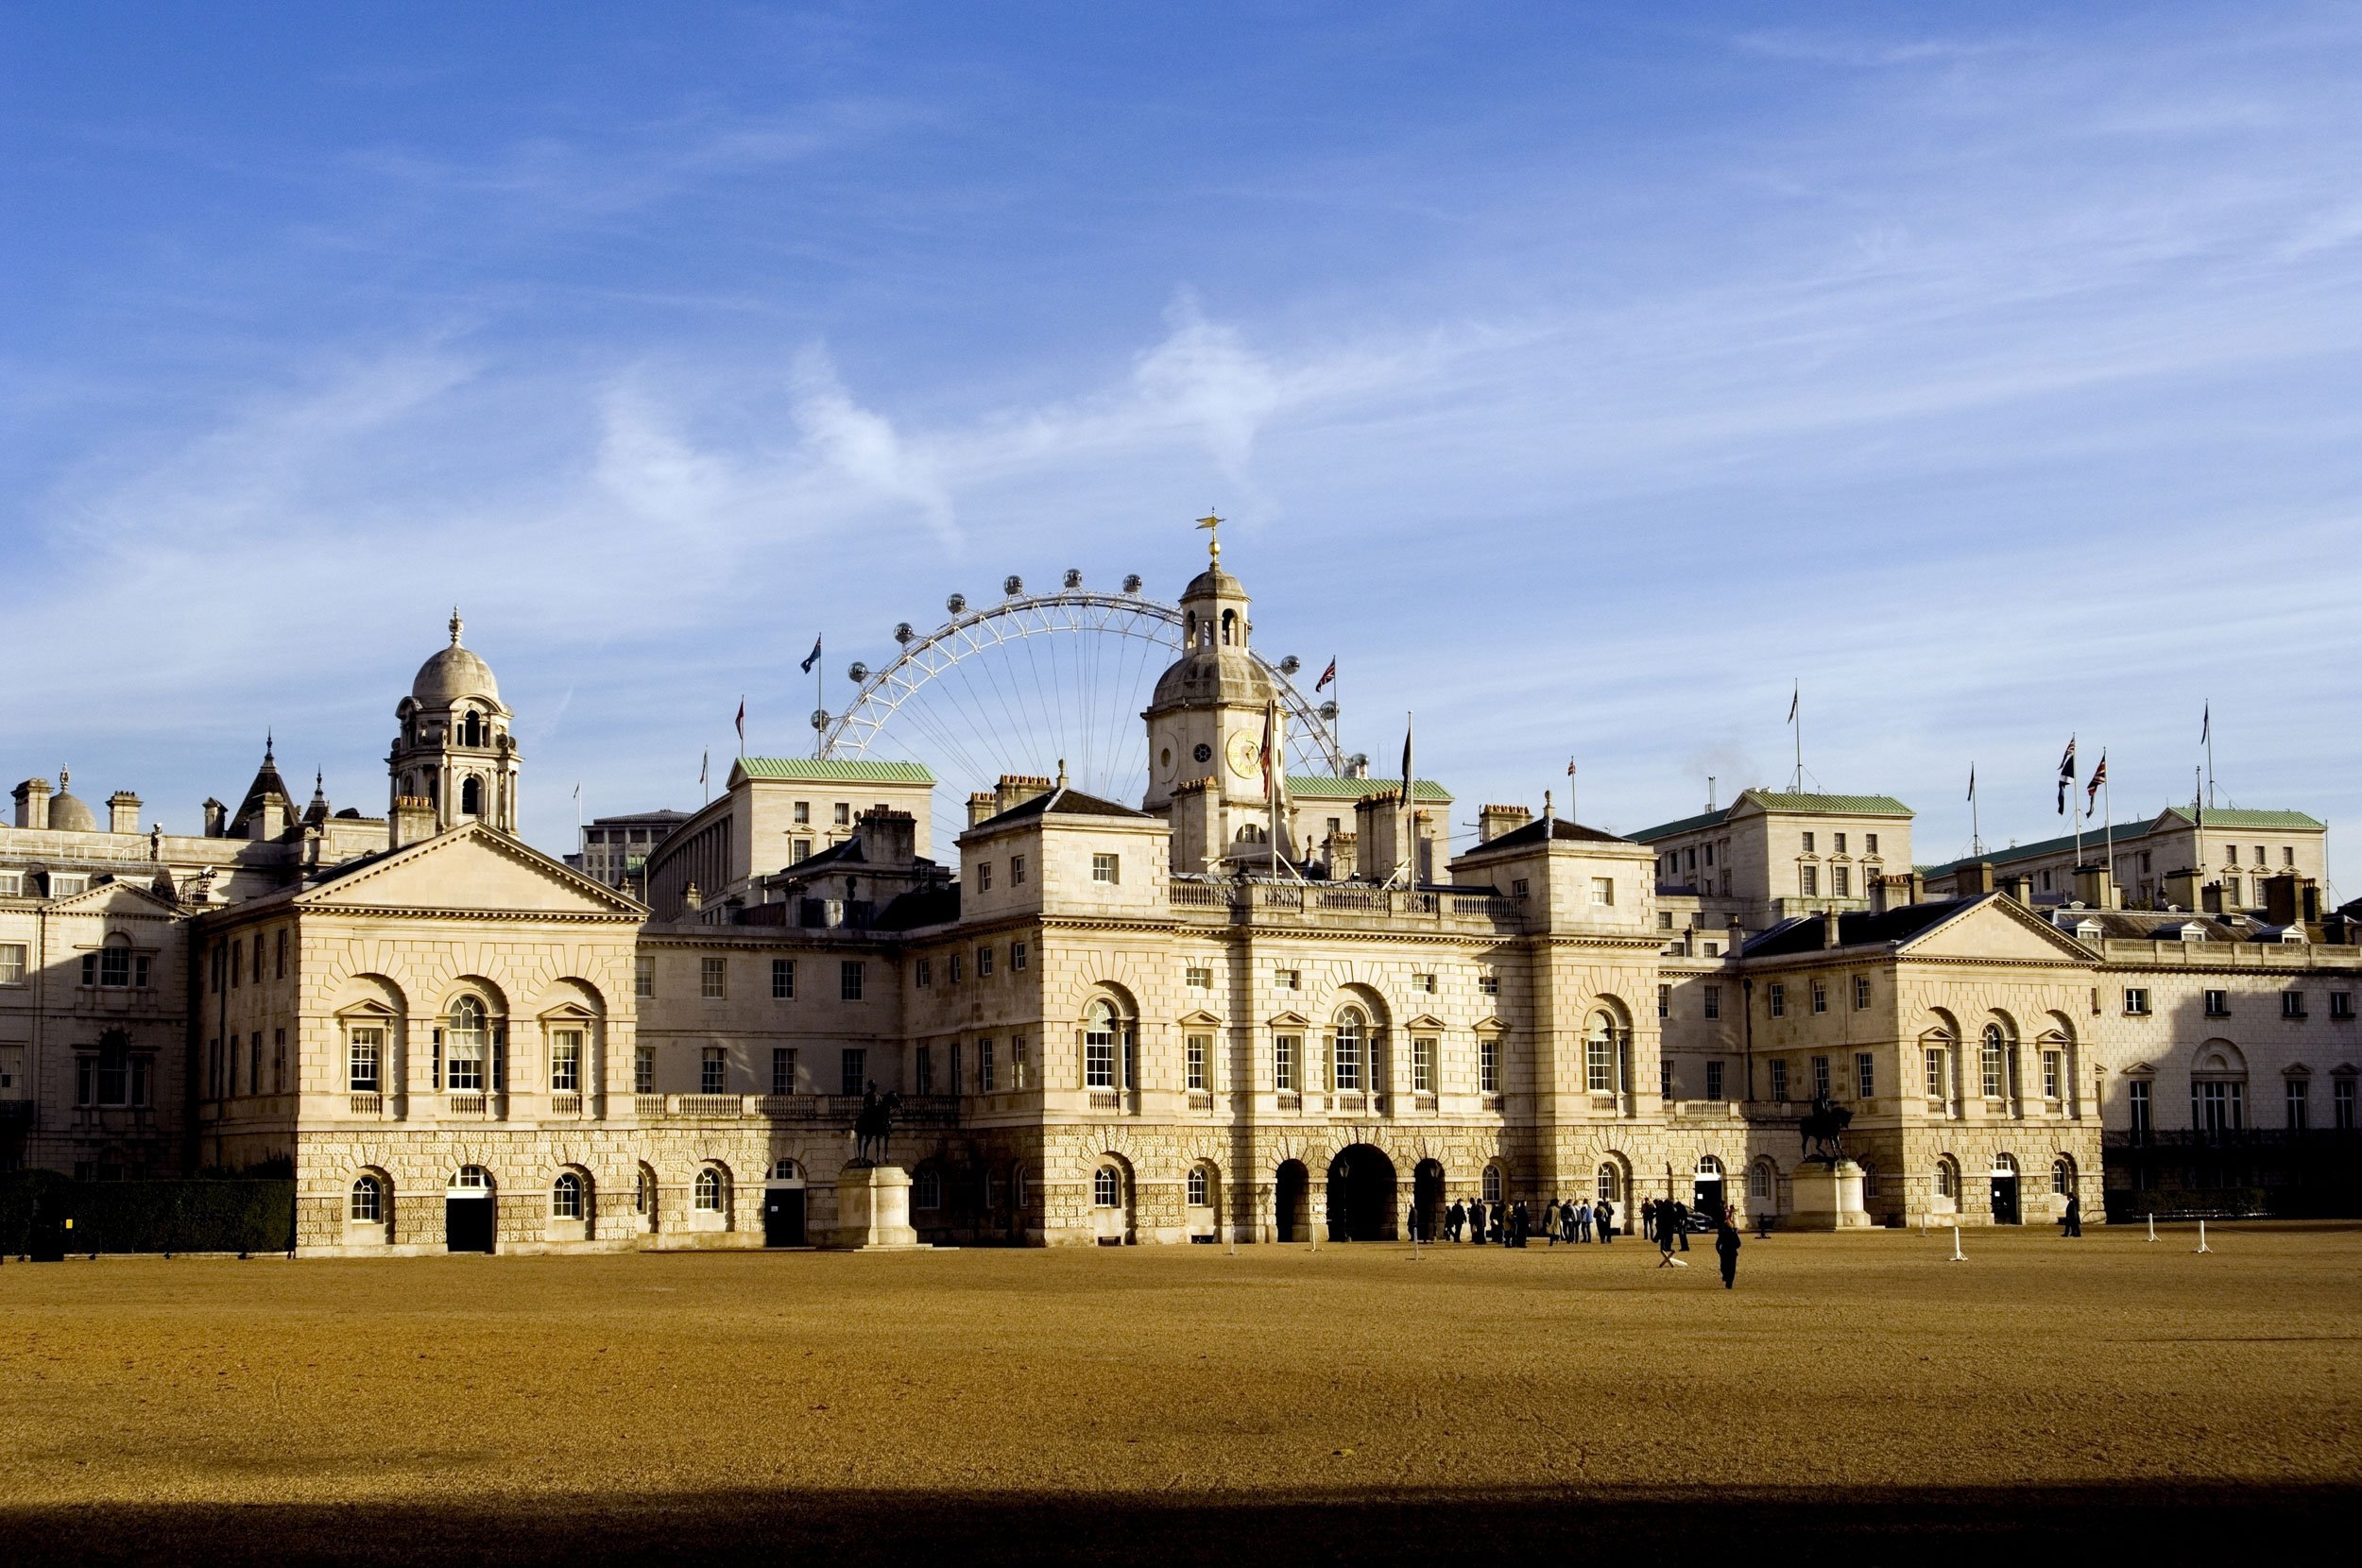 Image of Horse Guards Parade in Whitehall, designed 1745-48 by William Kent, built 1750-59 by John Vardy. The domed clock tower and lantern replicates a feature of the earlier horse guards on the same site.